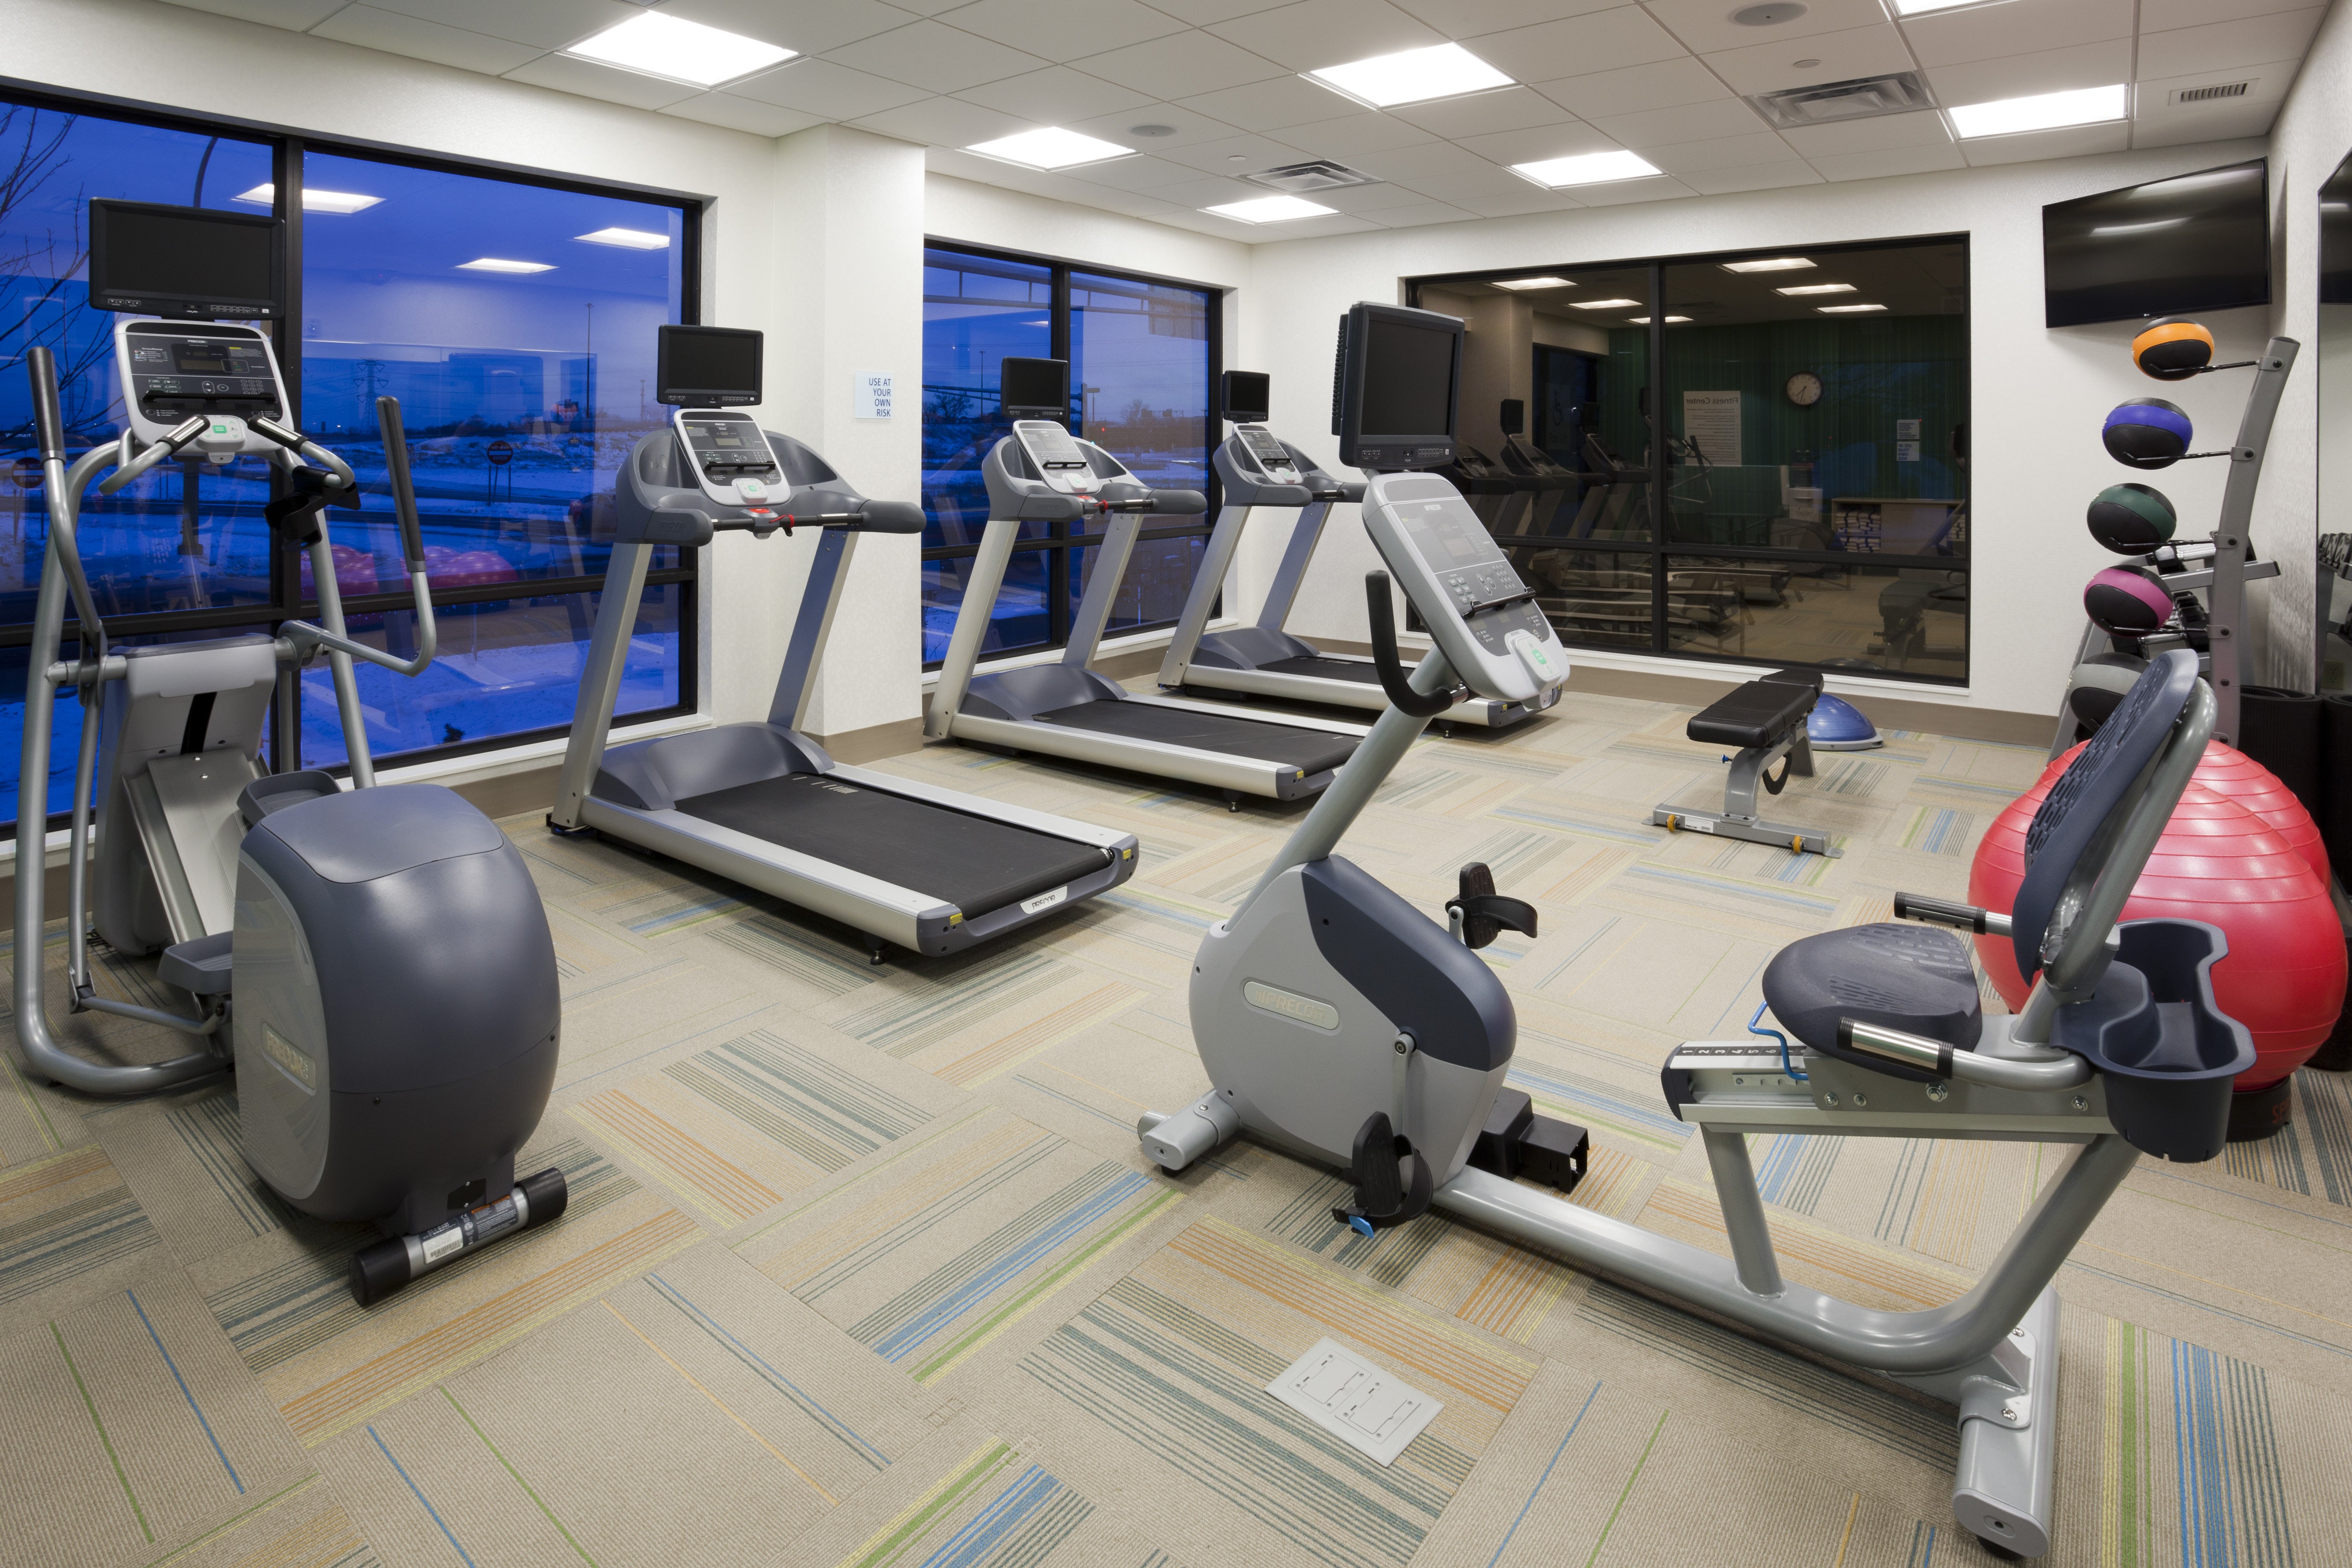 Our onsite fitness center has fitness equipment and free weights!